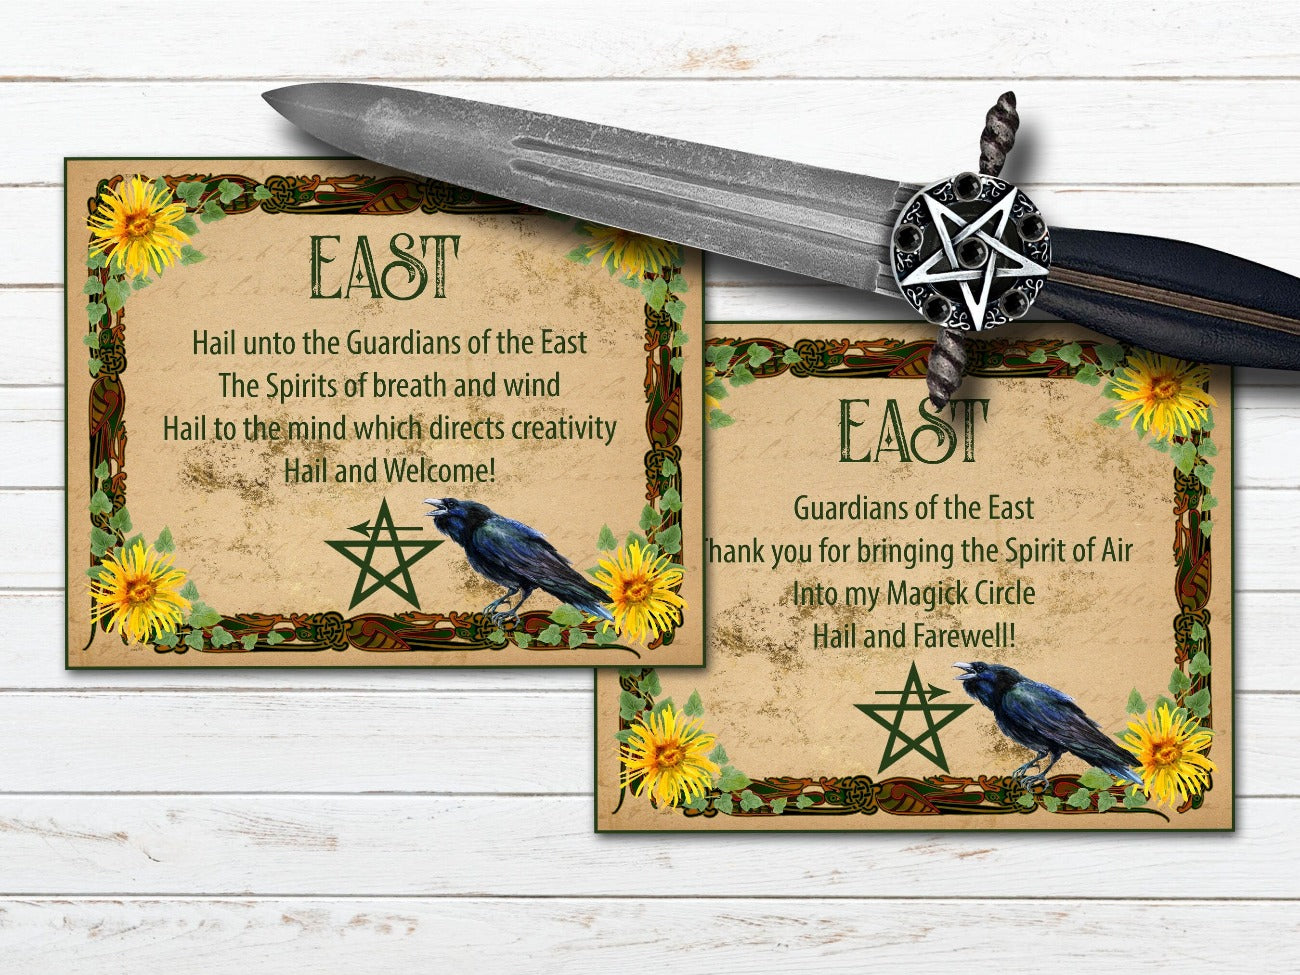 East Invoking and Banishing Quarter Cards. Each card has a floral border with a crow and pentacle with an arrow indicating the correct way to draw it.